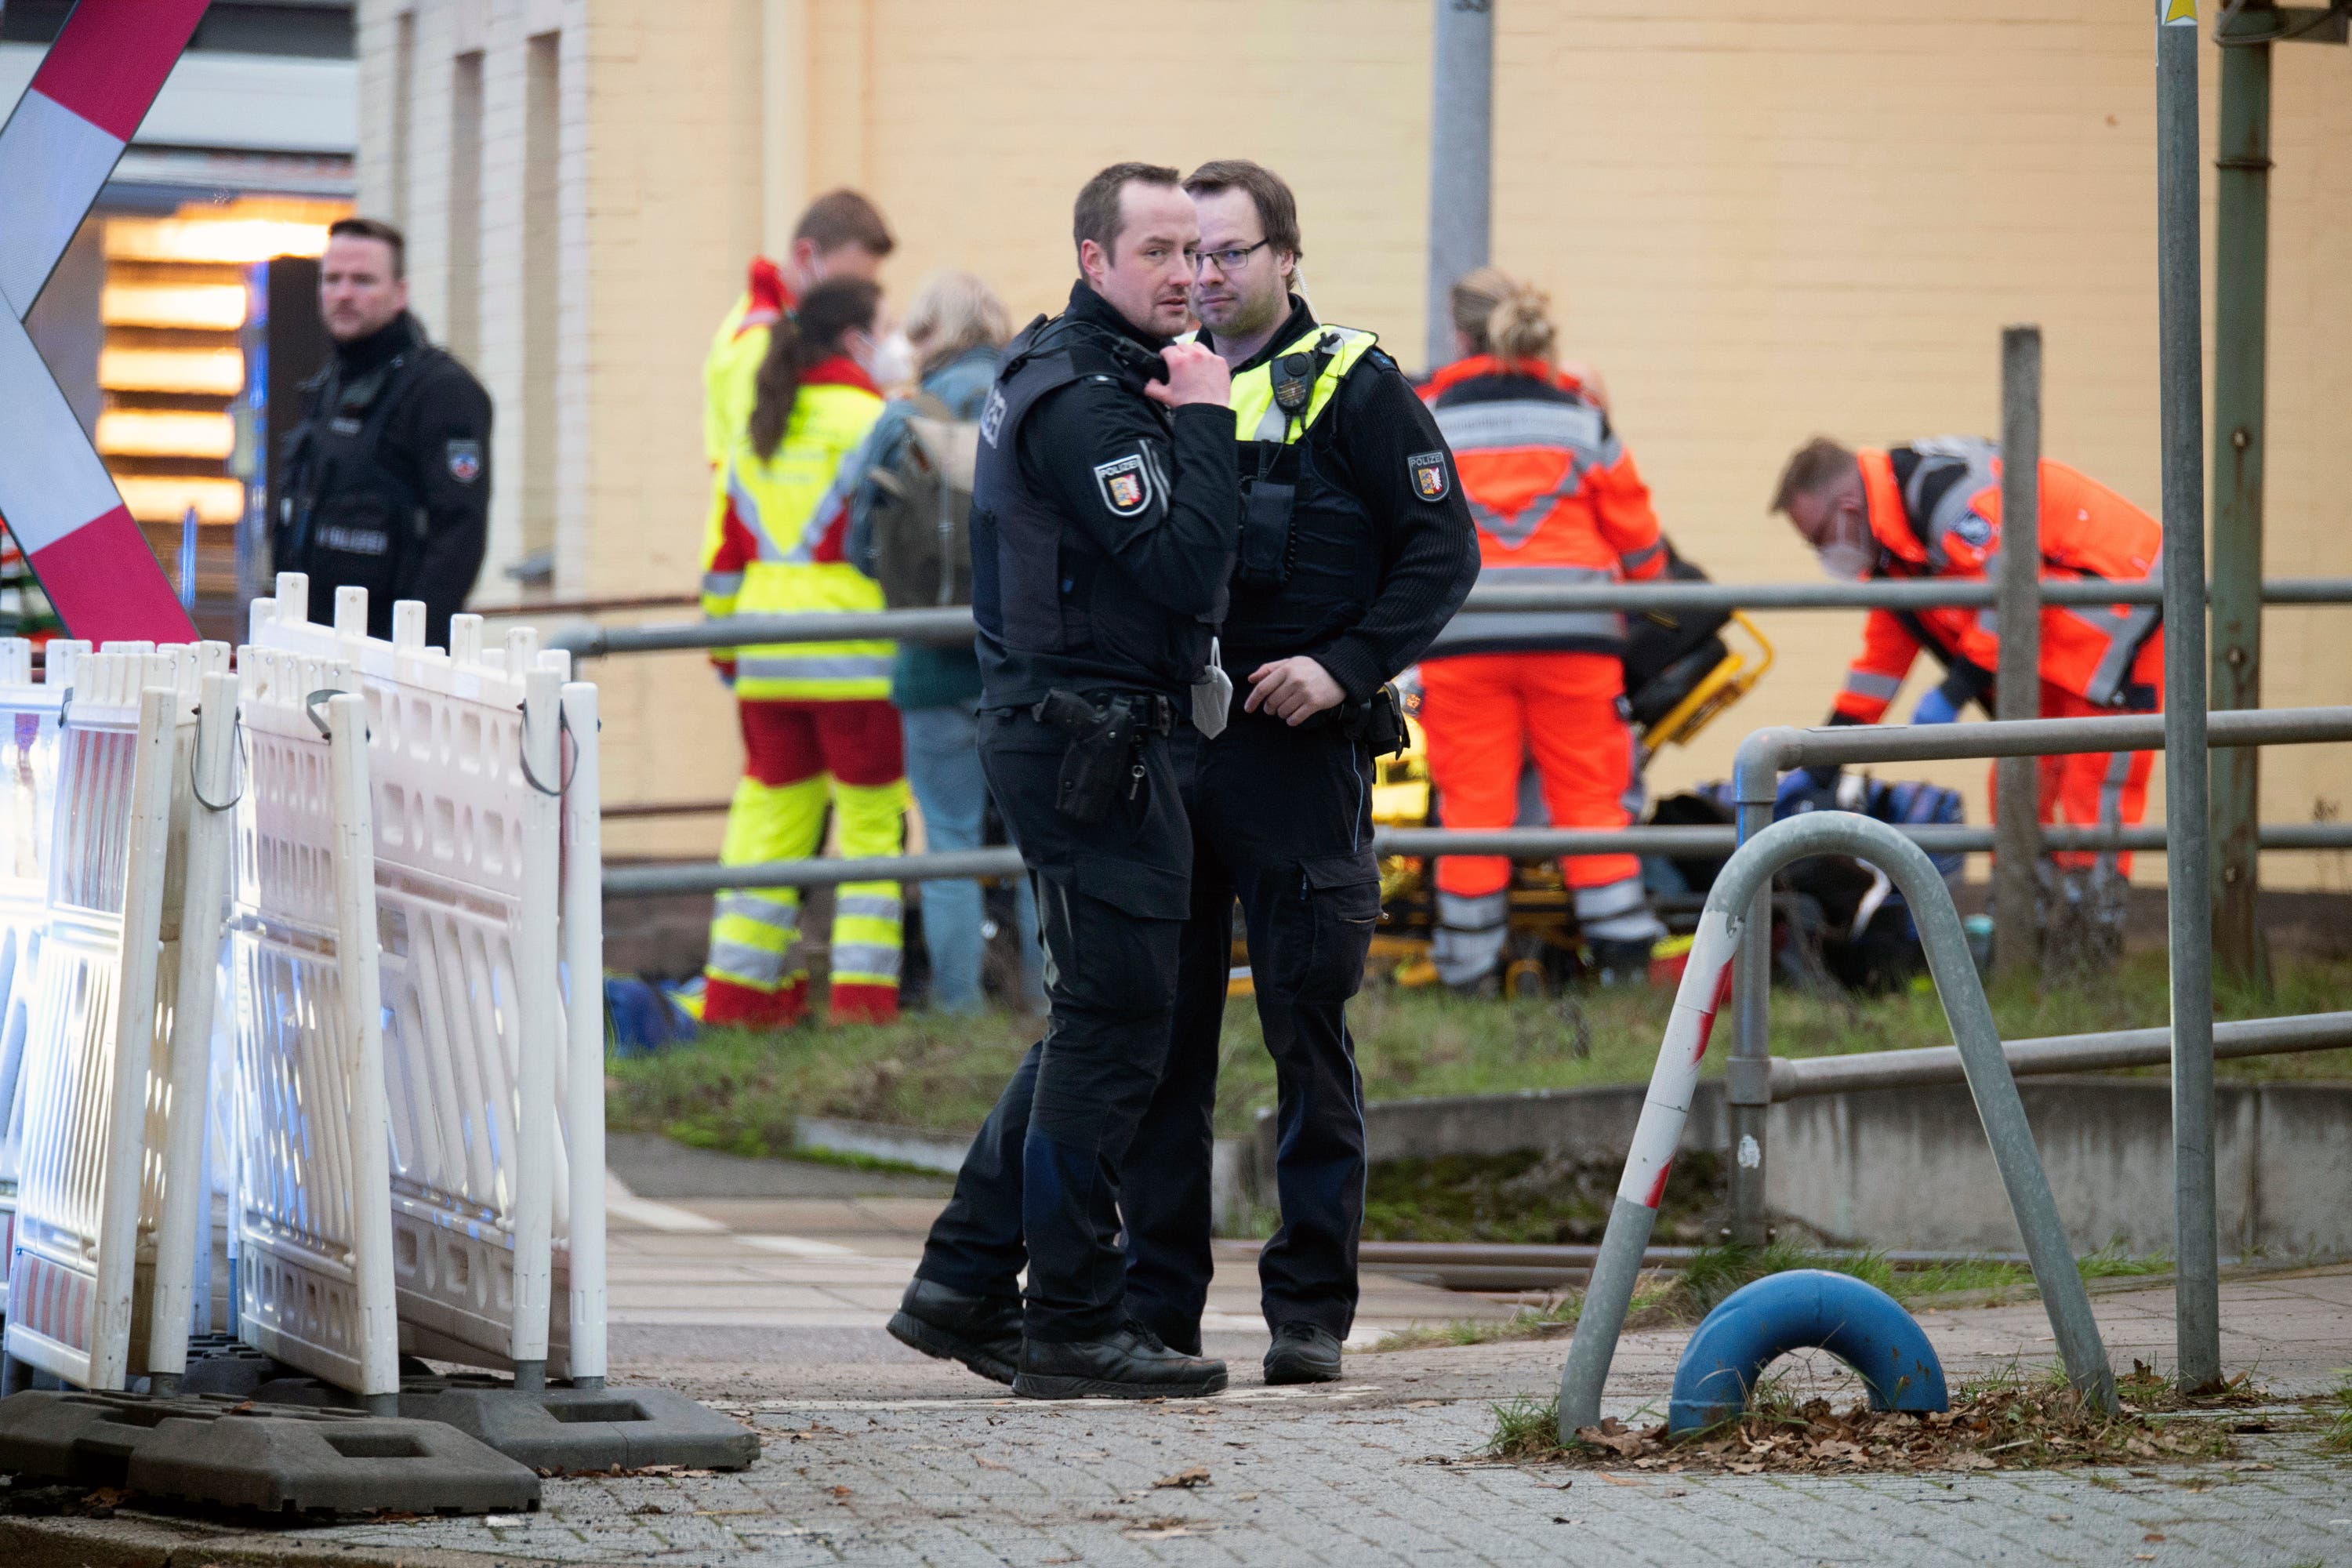 Police officers stand guard as emergency services work at Brokstedt station in Germany 